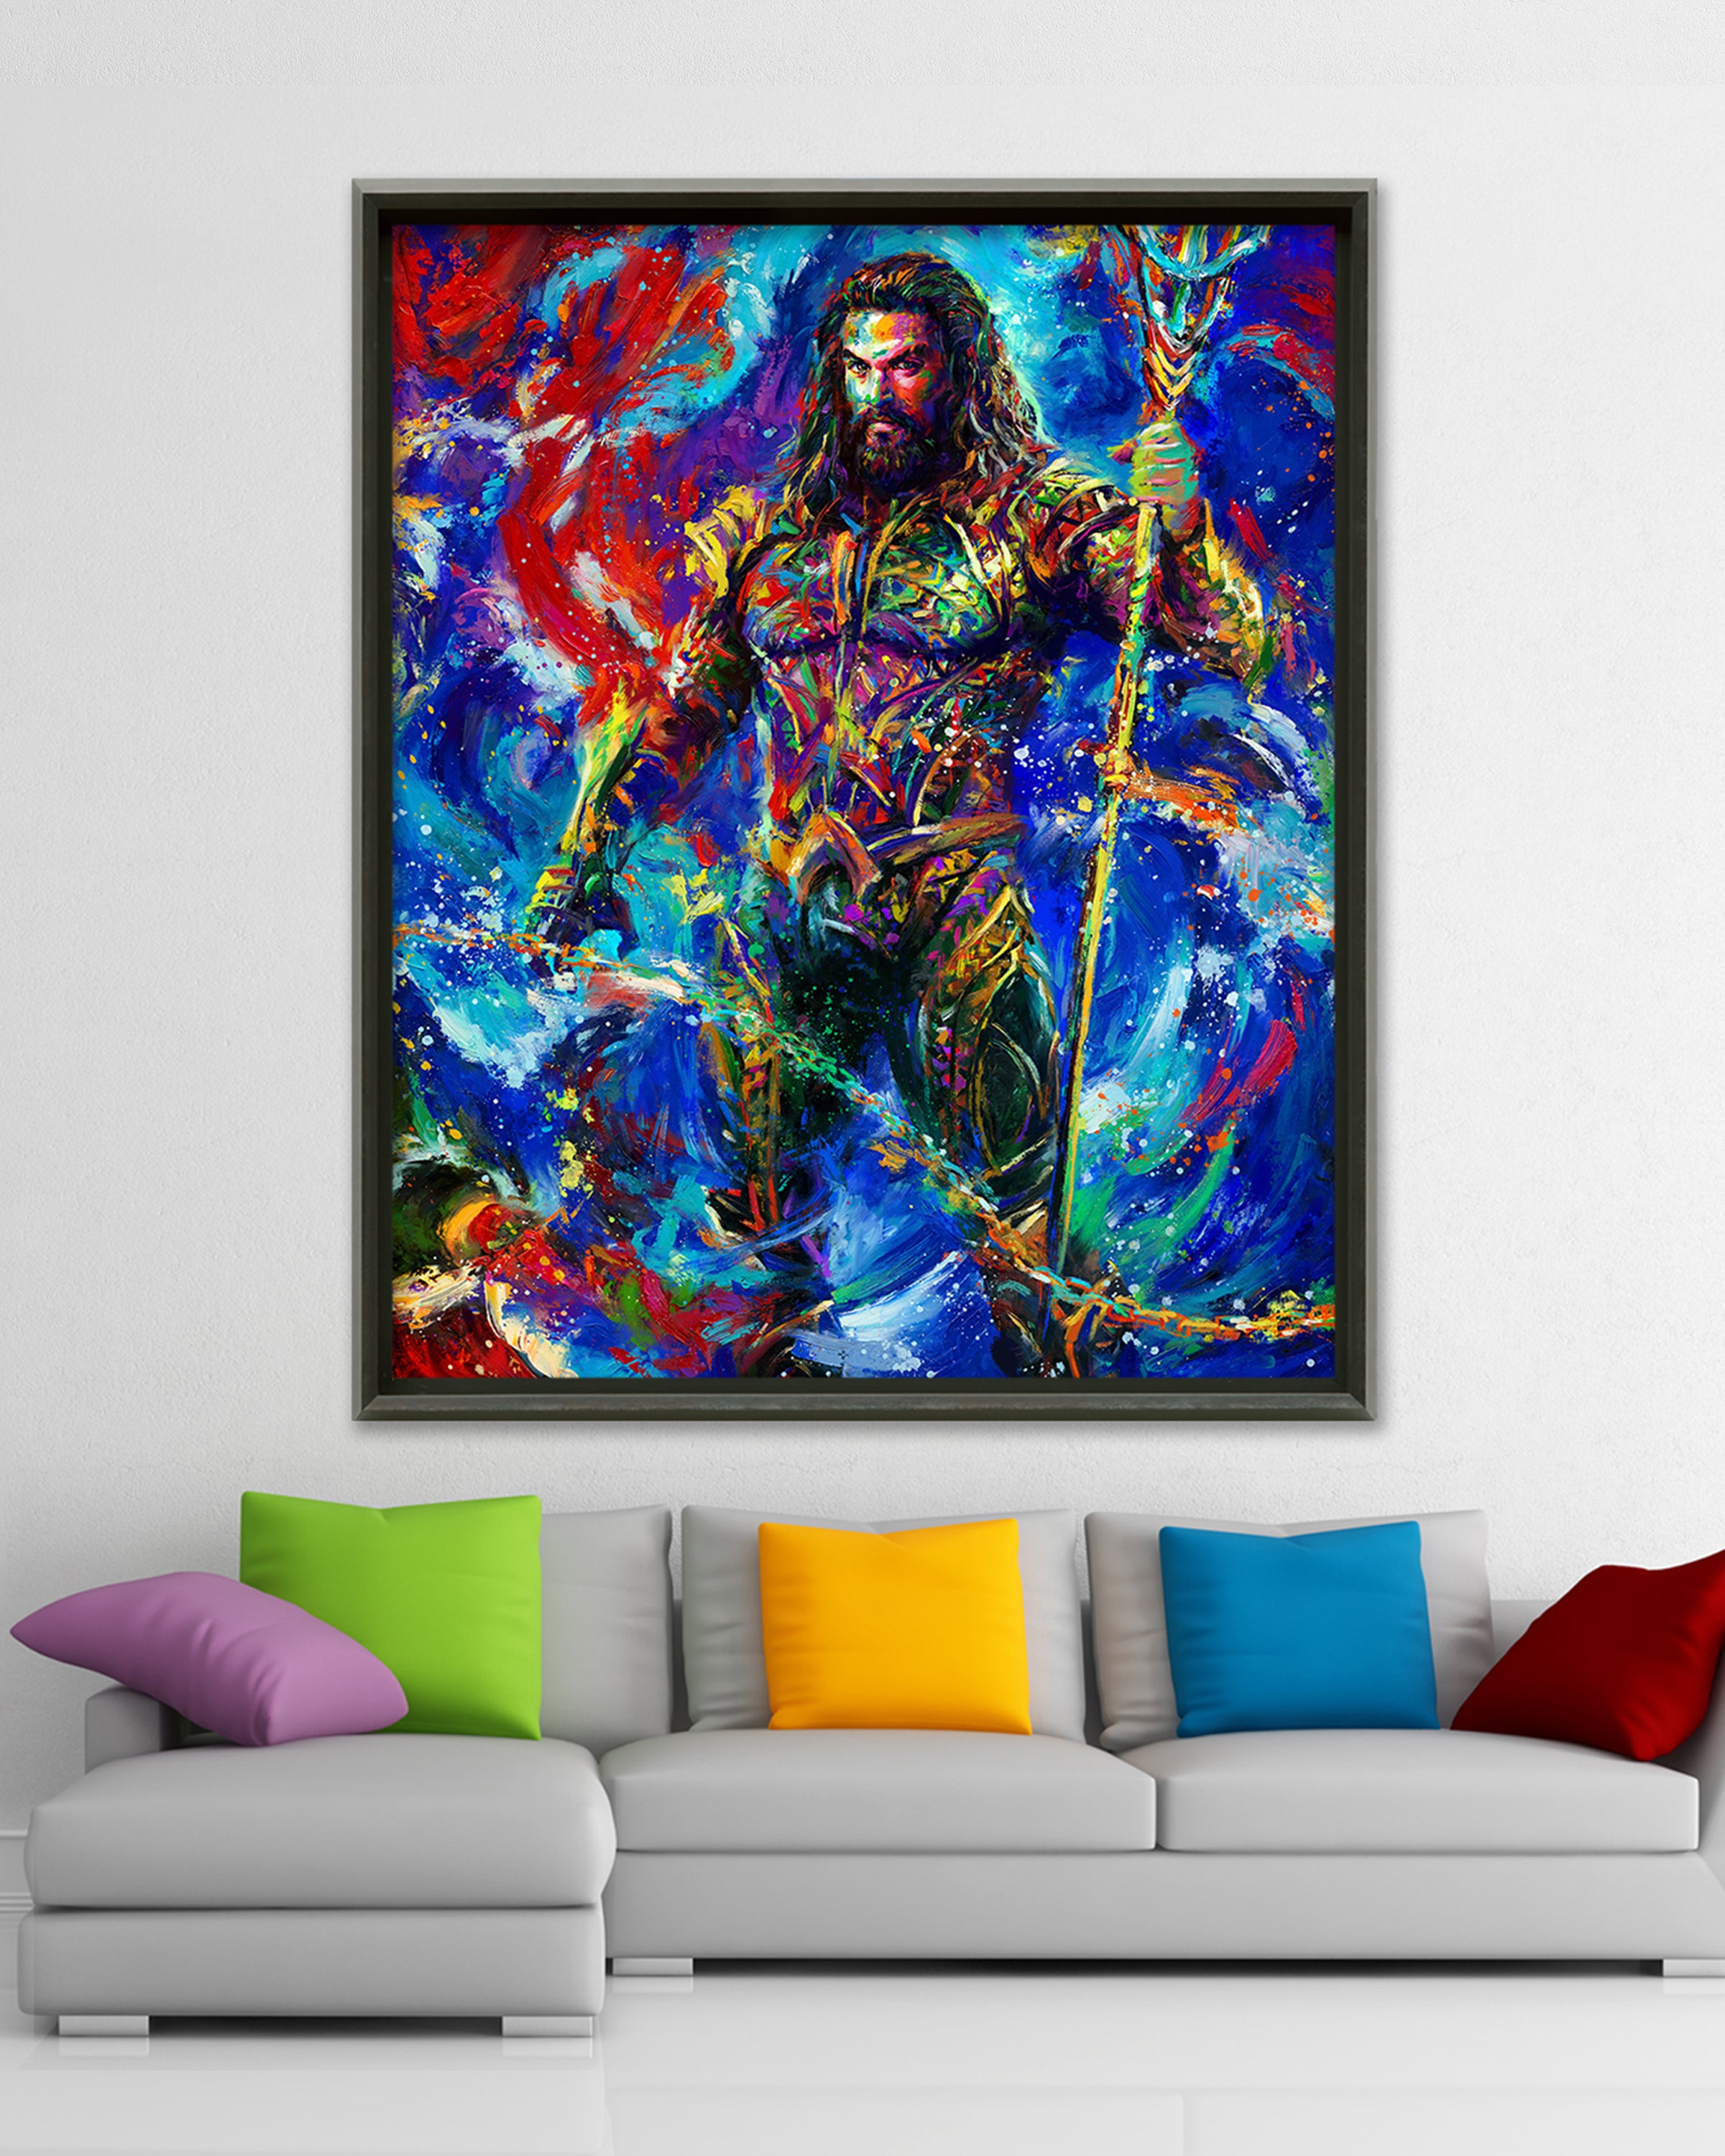 Oil on canvas original painting of Jason Momoa as Aquaman, DC Comics Arthur Curry, surrounded by the cool blue and purple colors of the ocean standing with pride holding his trident in colorful brushstrokes, color expressionism style in a room setting.